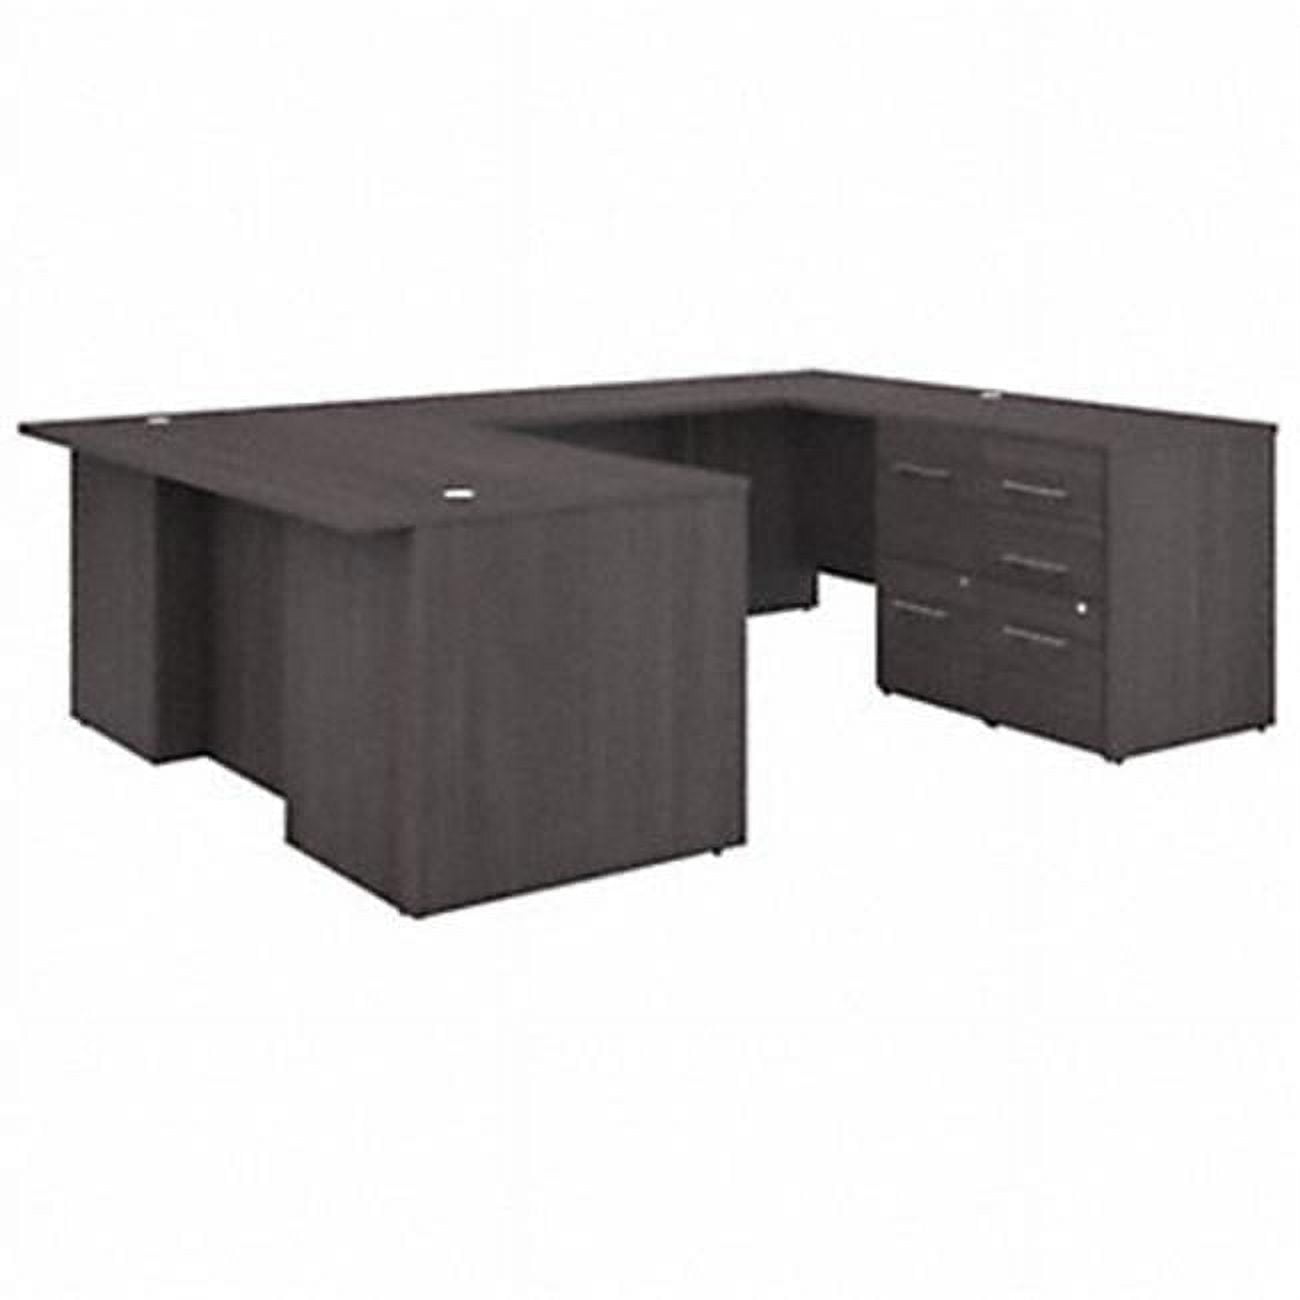 Picture of Bush Business Furniture OF5002SGSU 72 in. U Shaped Executive Desk with Drawers, Storm Gray